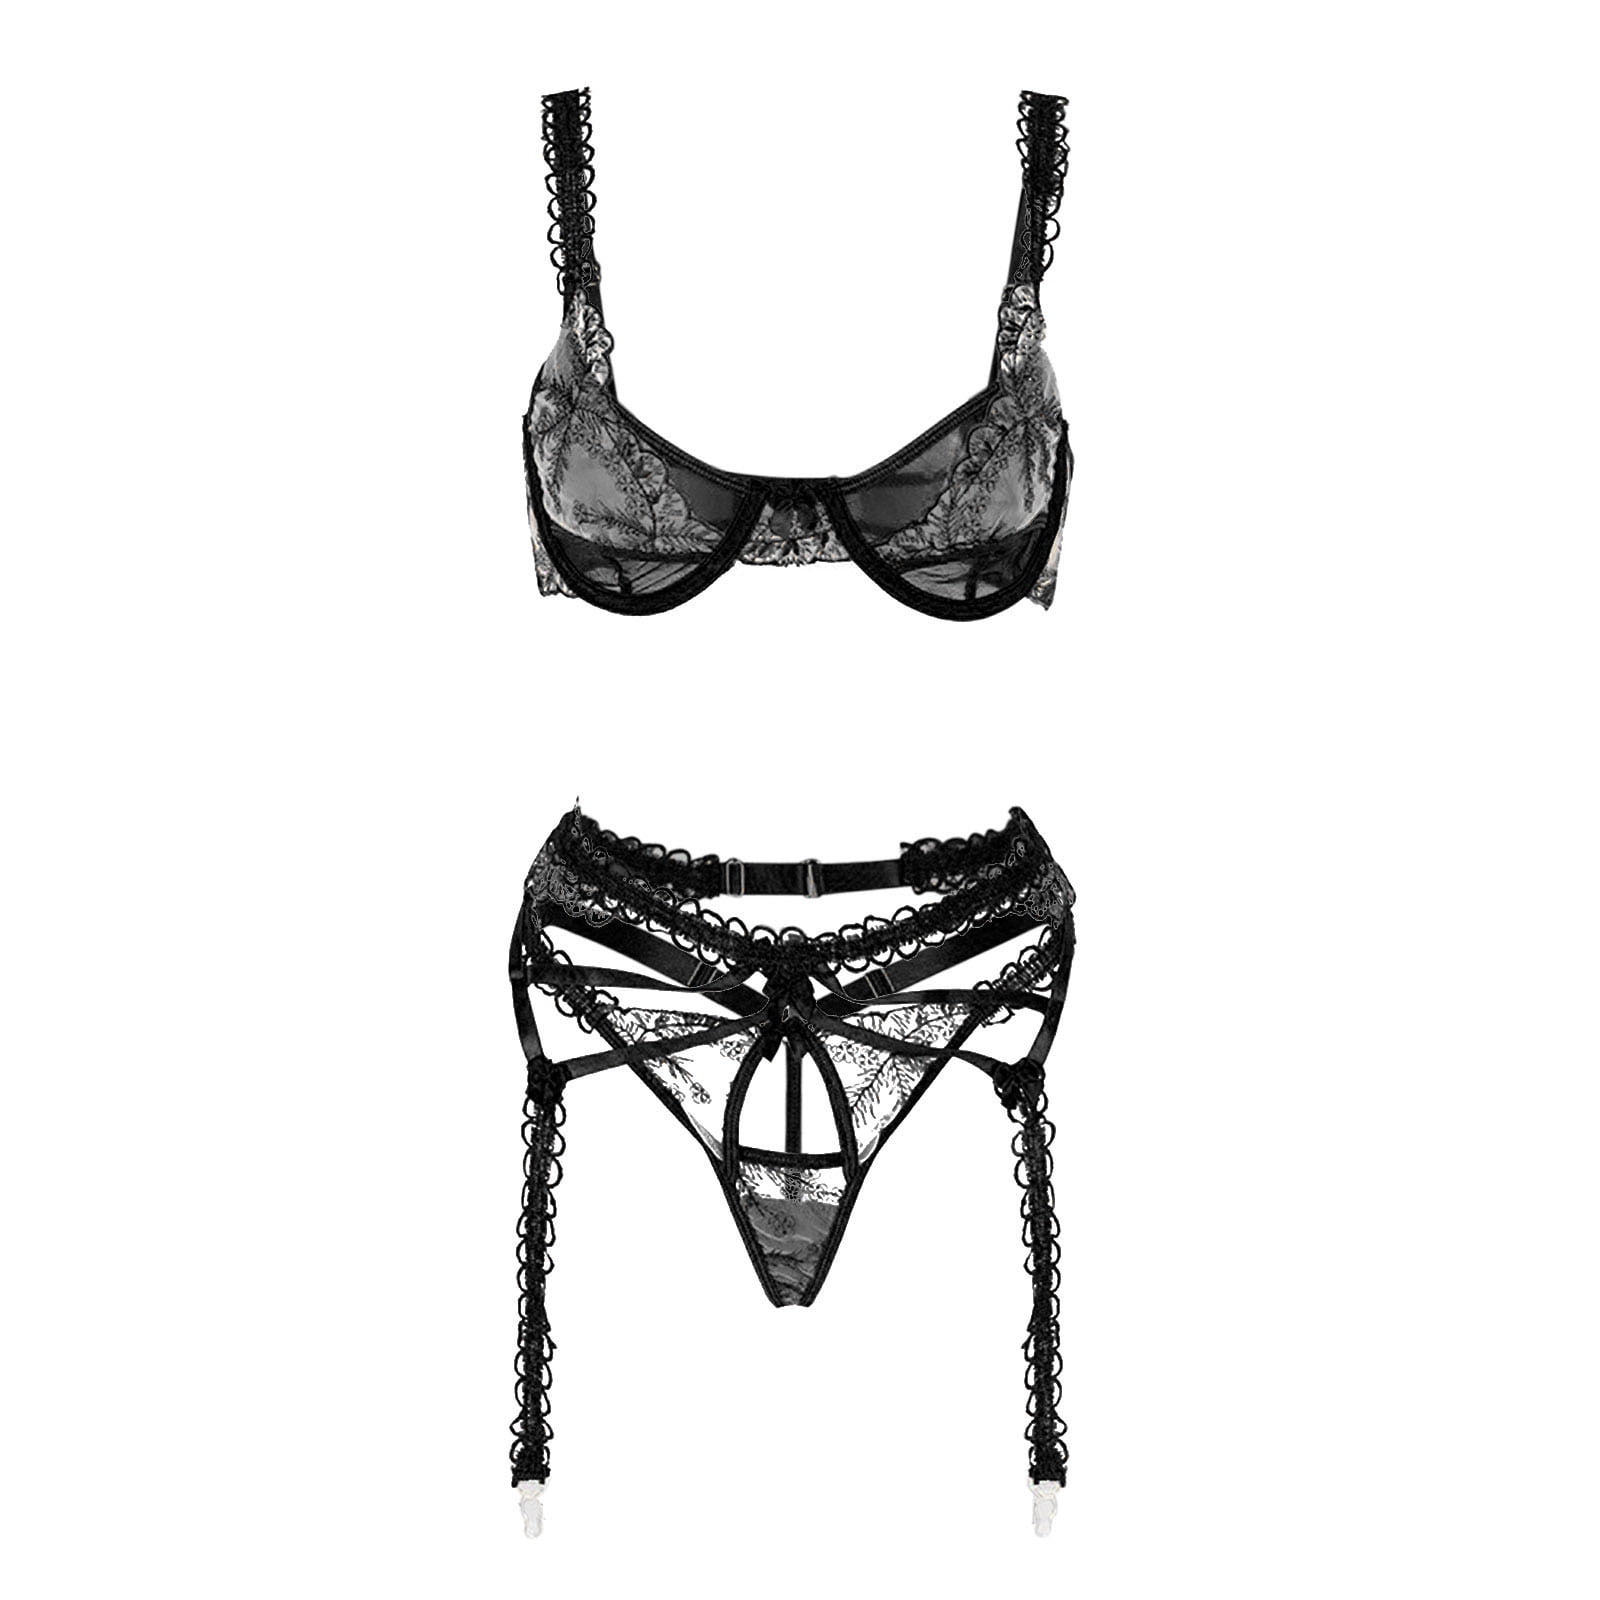 Funny Lingerie Merch & Gifts for Sale